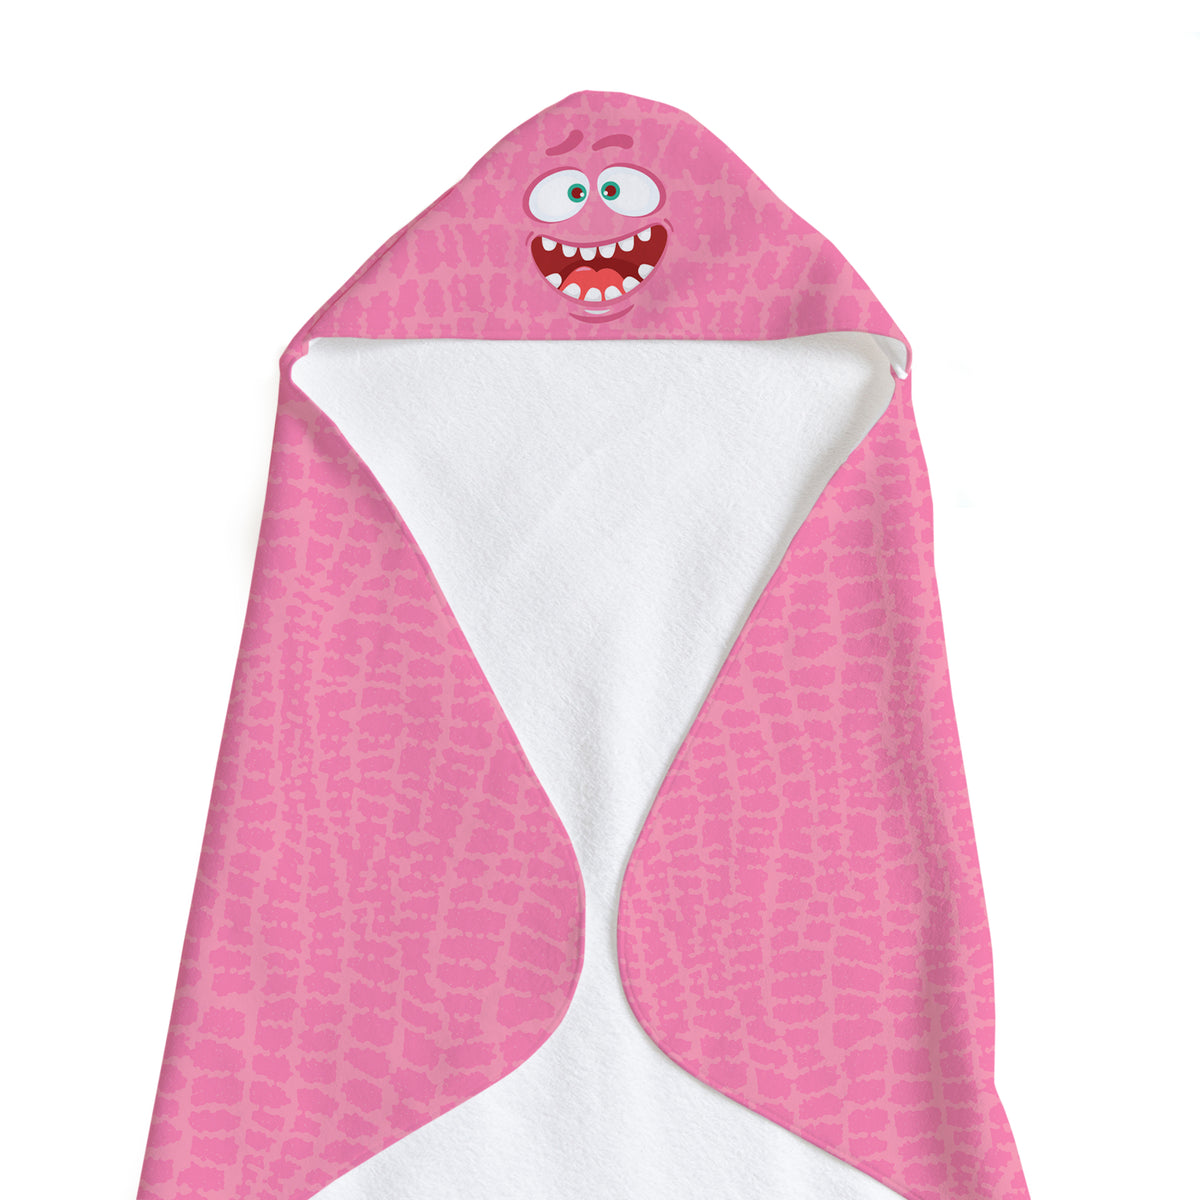 Buy this Pink Monster Soft and Absorbent Hooded Baby Towel